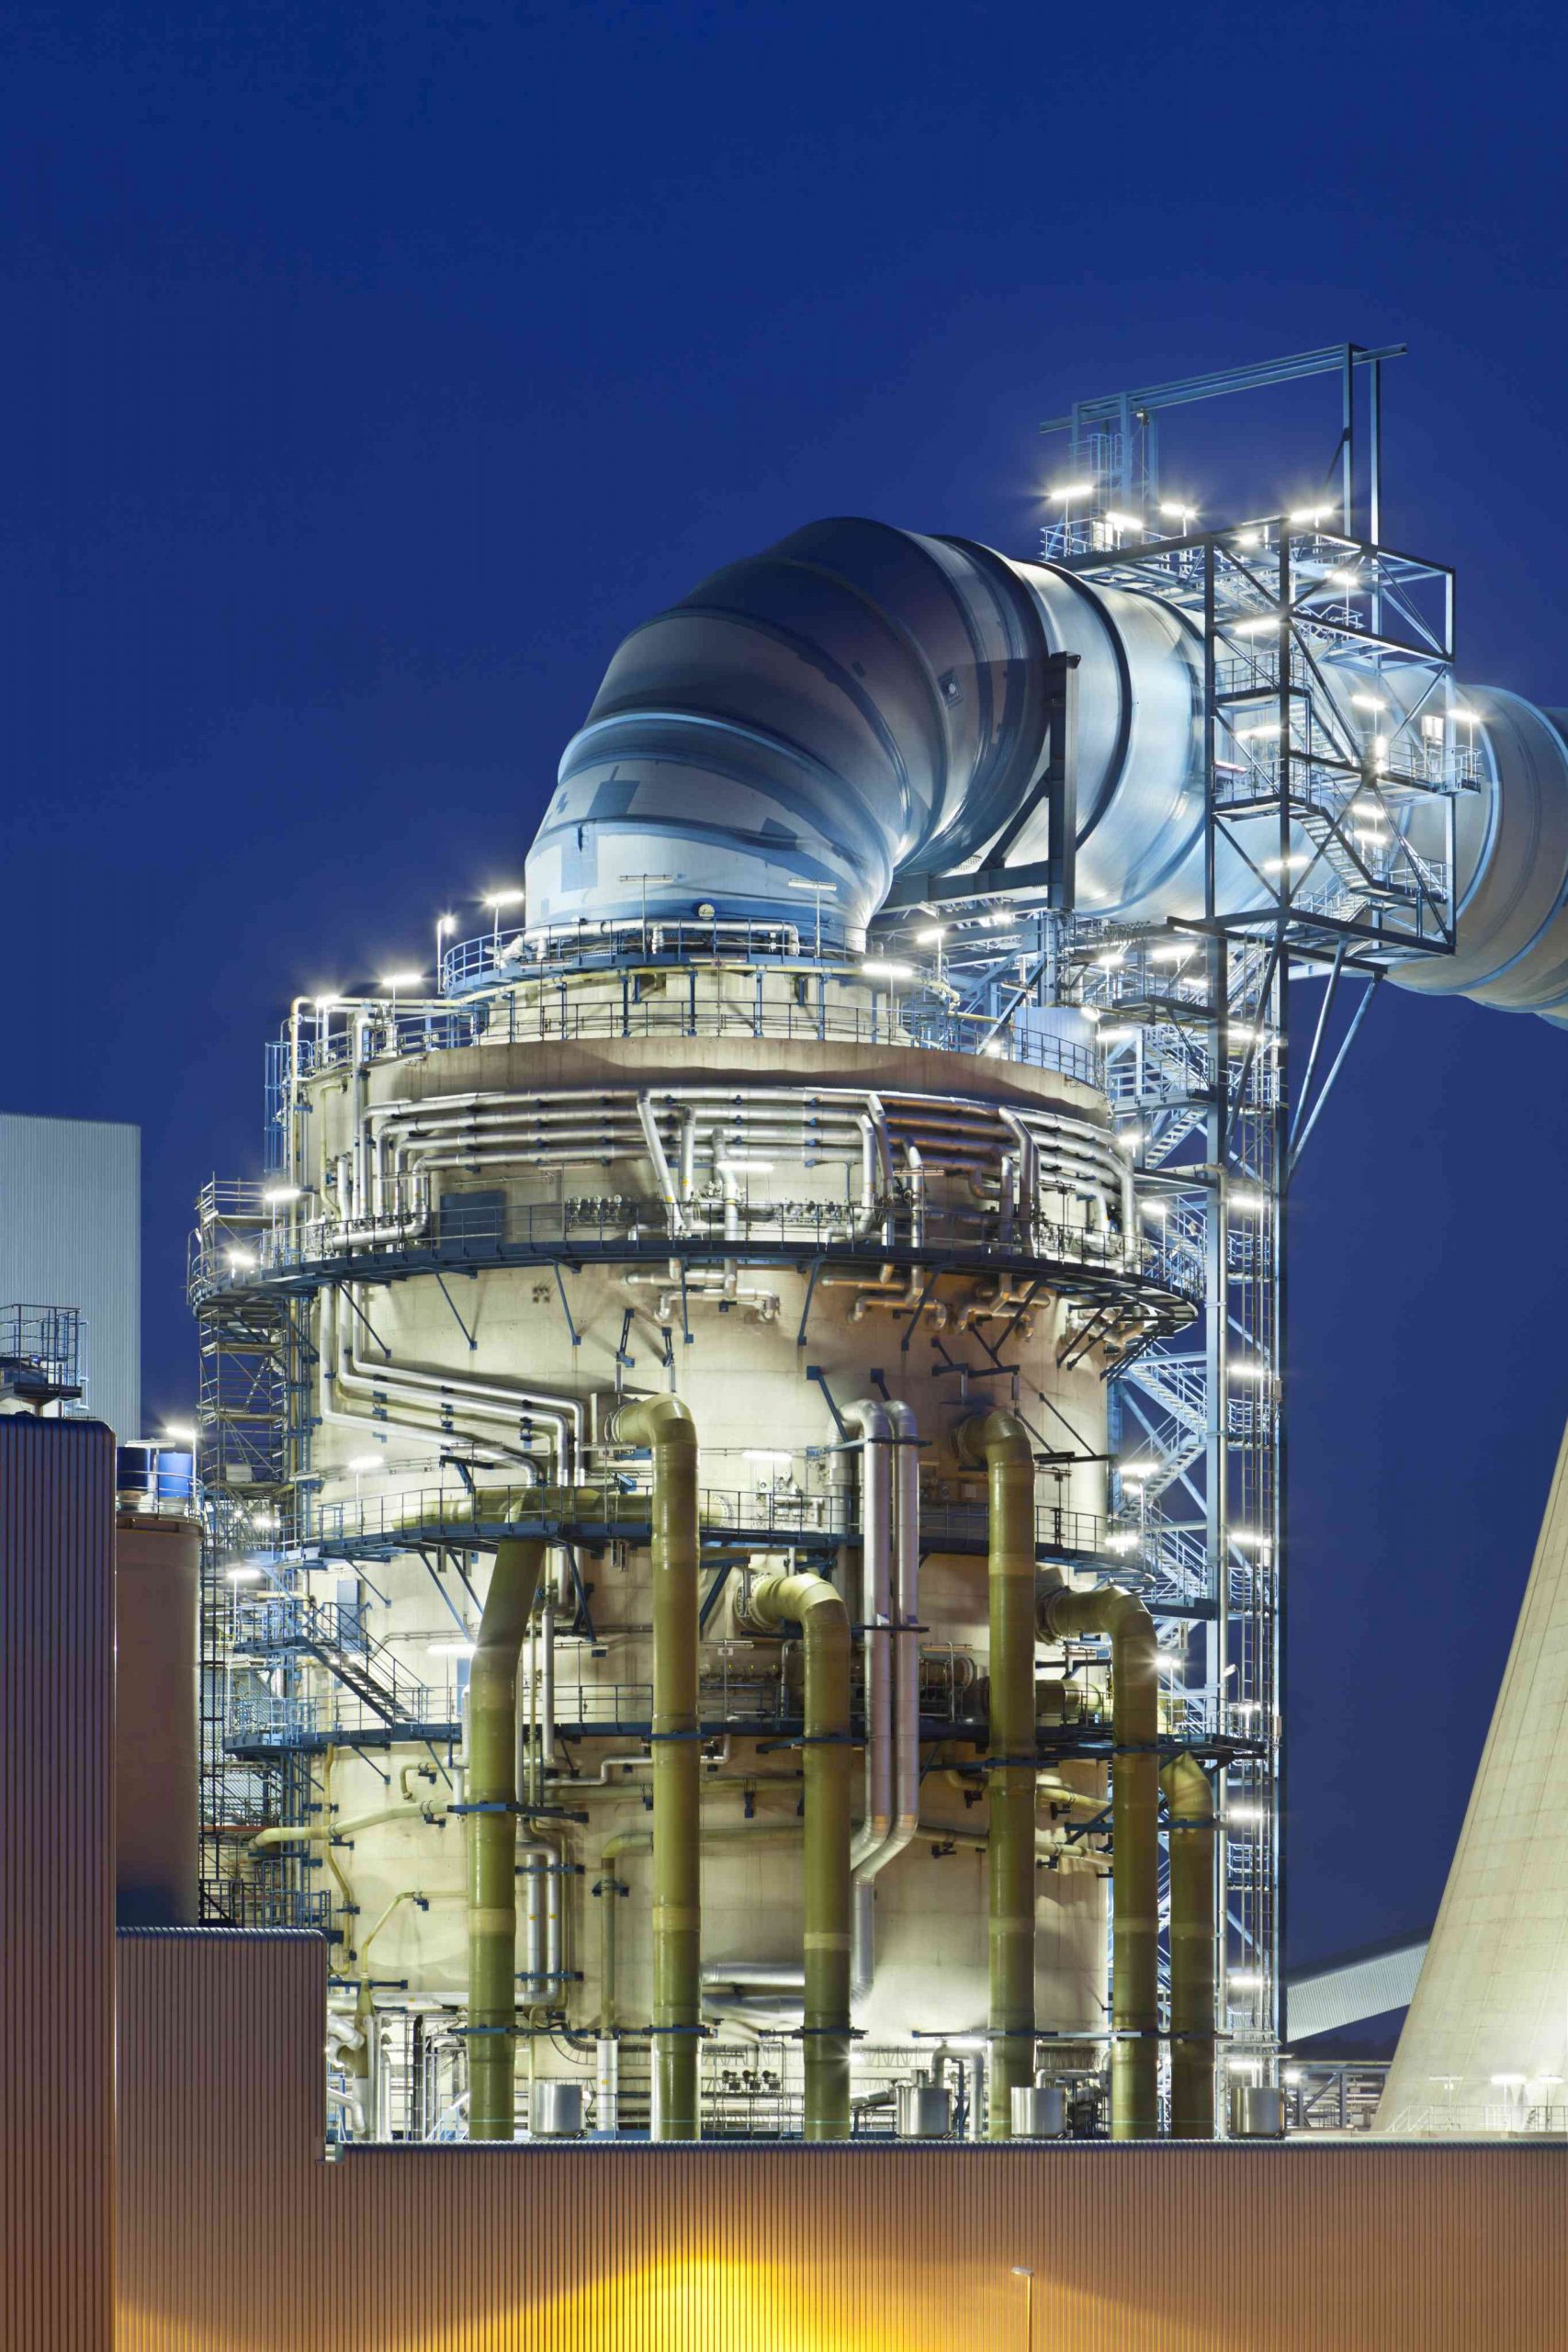 Flue-gas desulfurization plant in a modern brown coal power station.